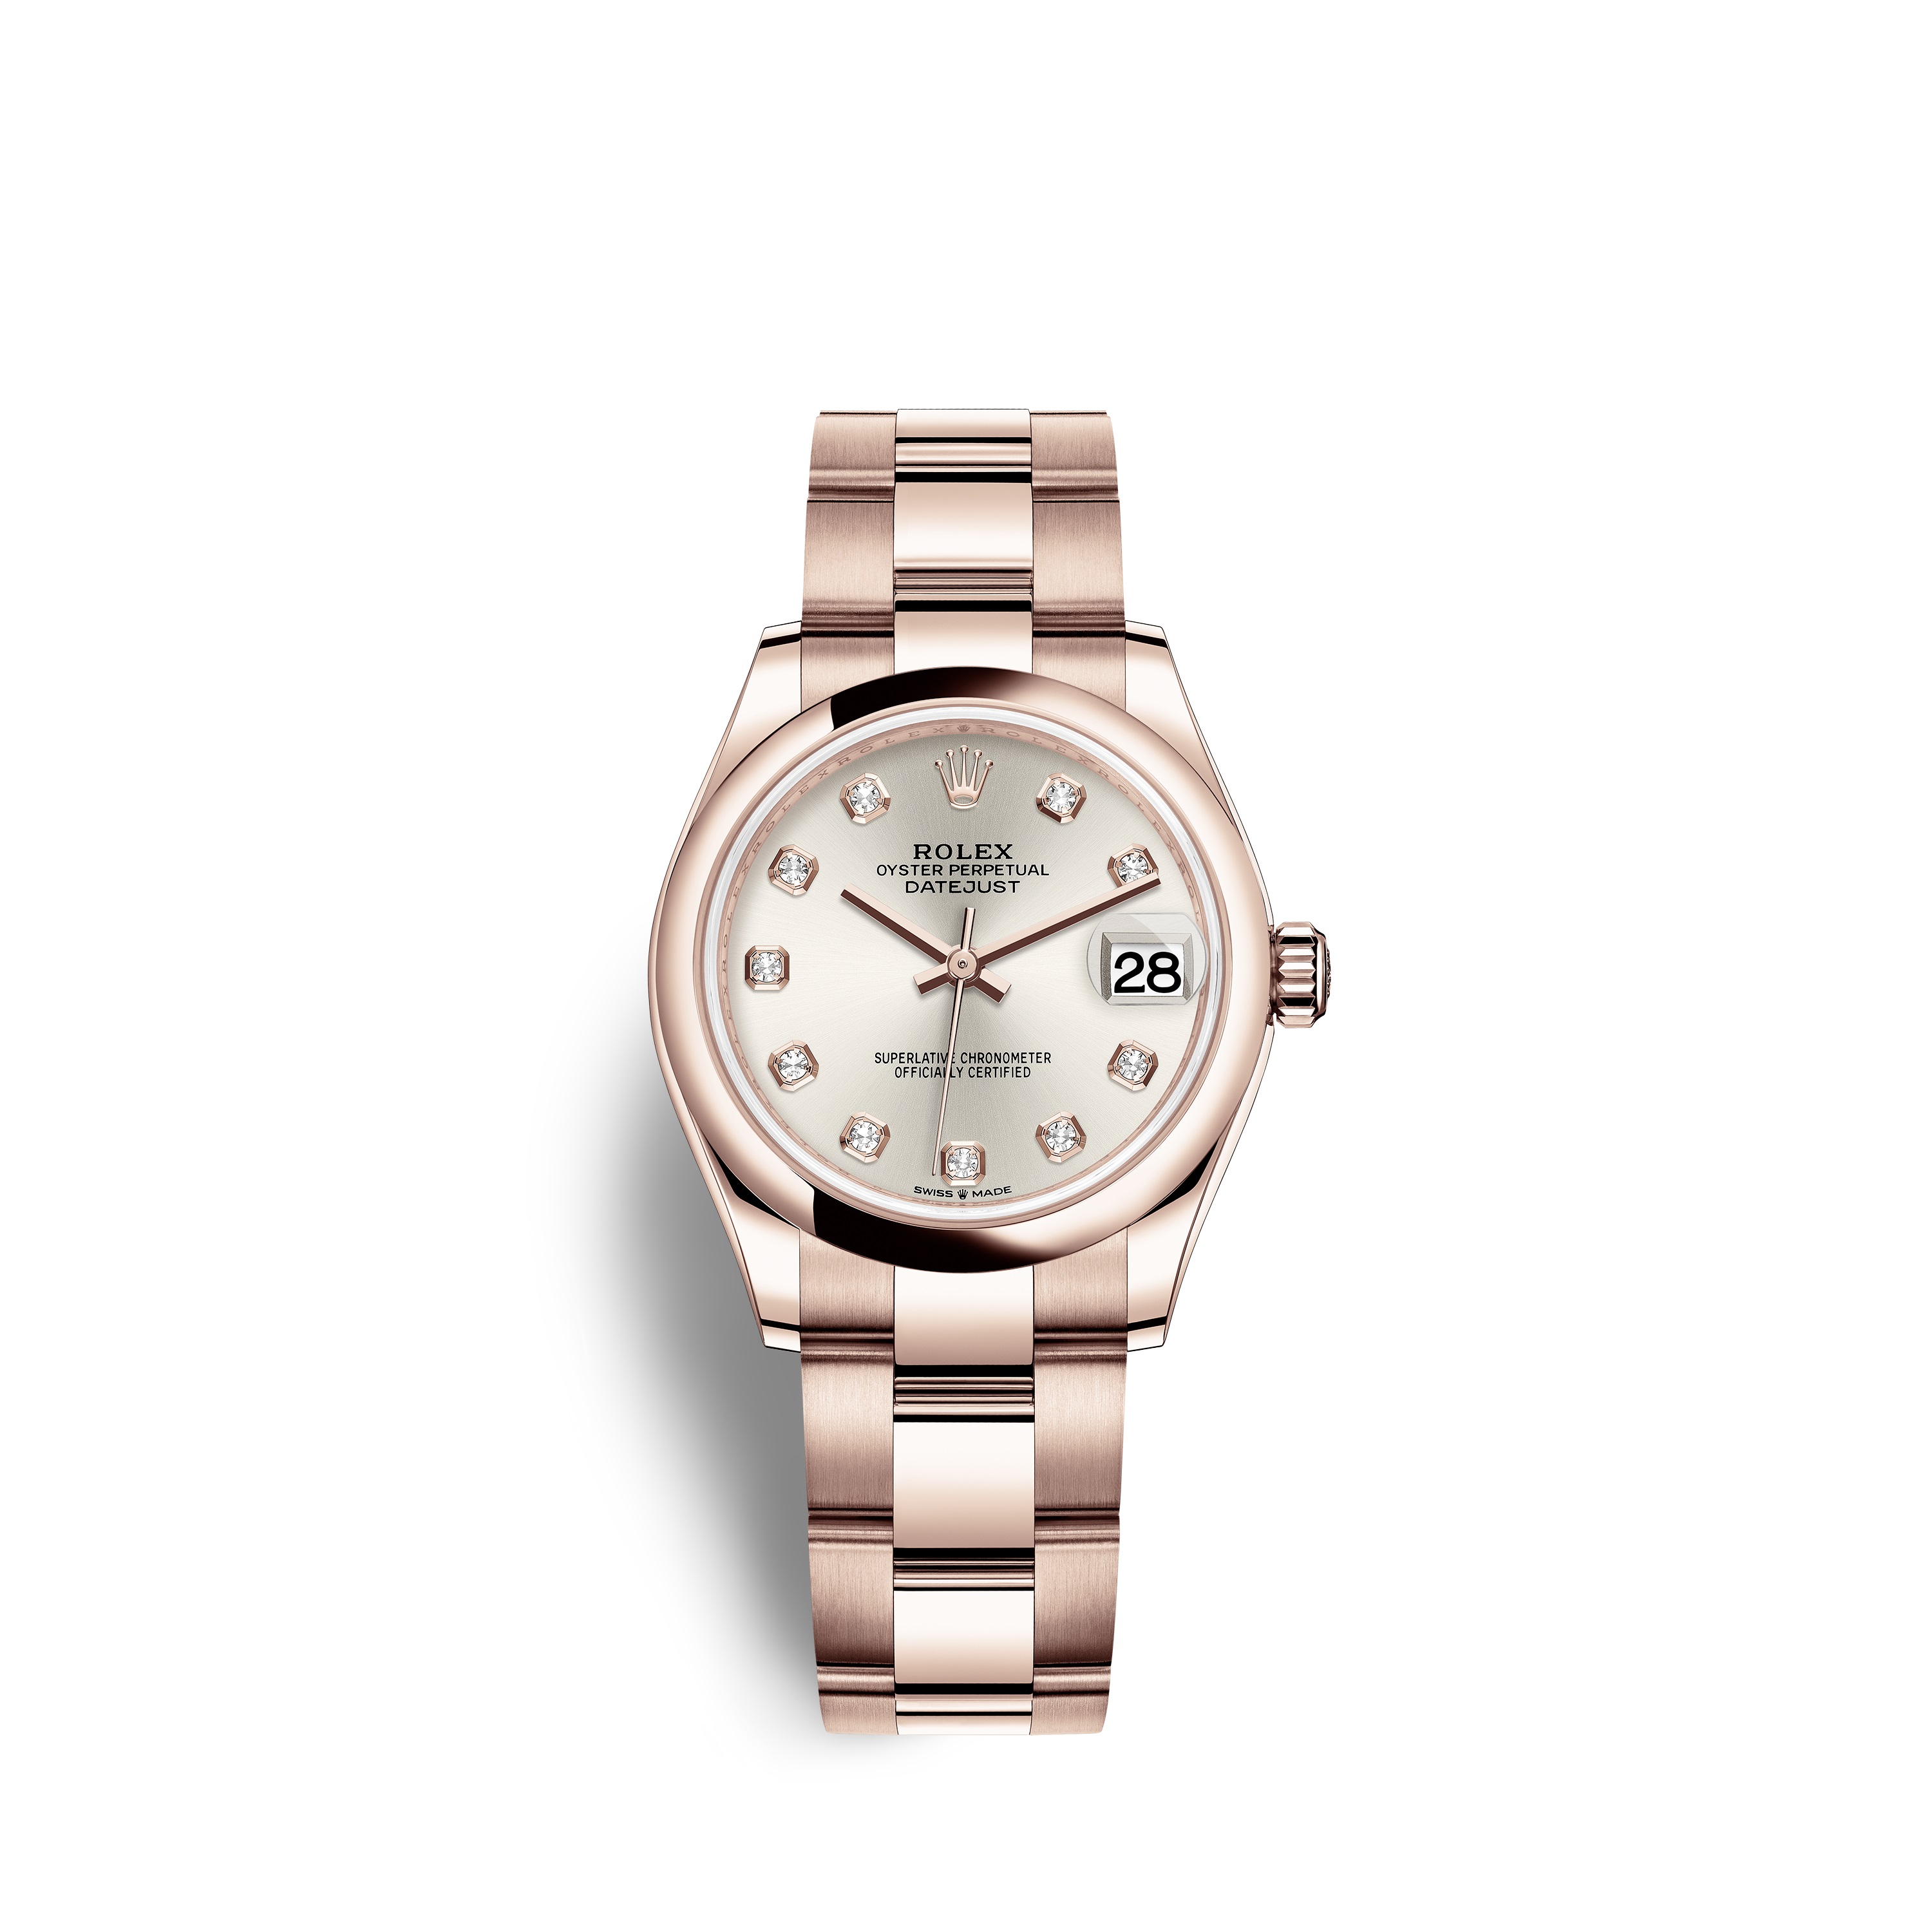 Datejust 31 278245 Rose Gold Watch (Silver Set with Diamonds)